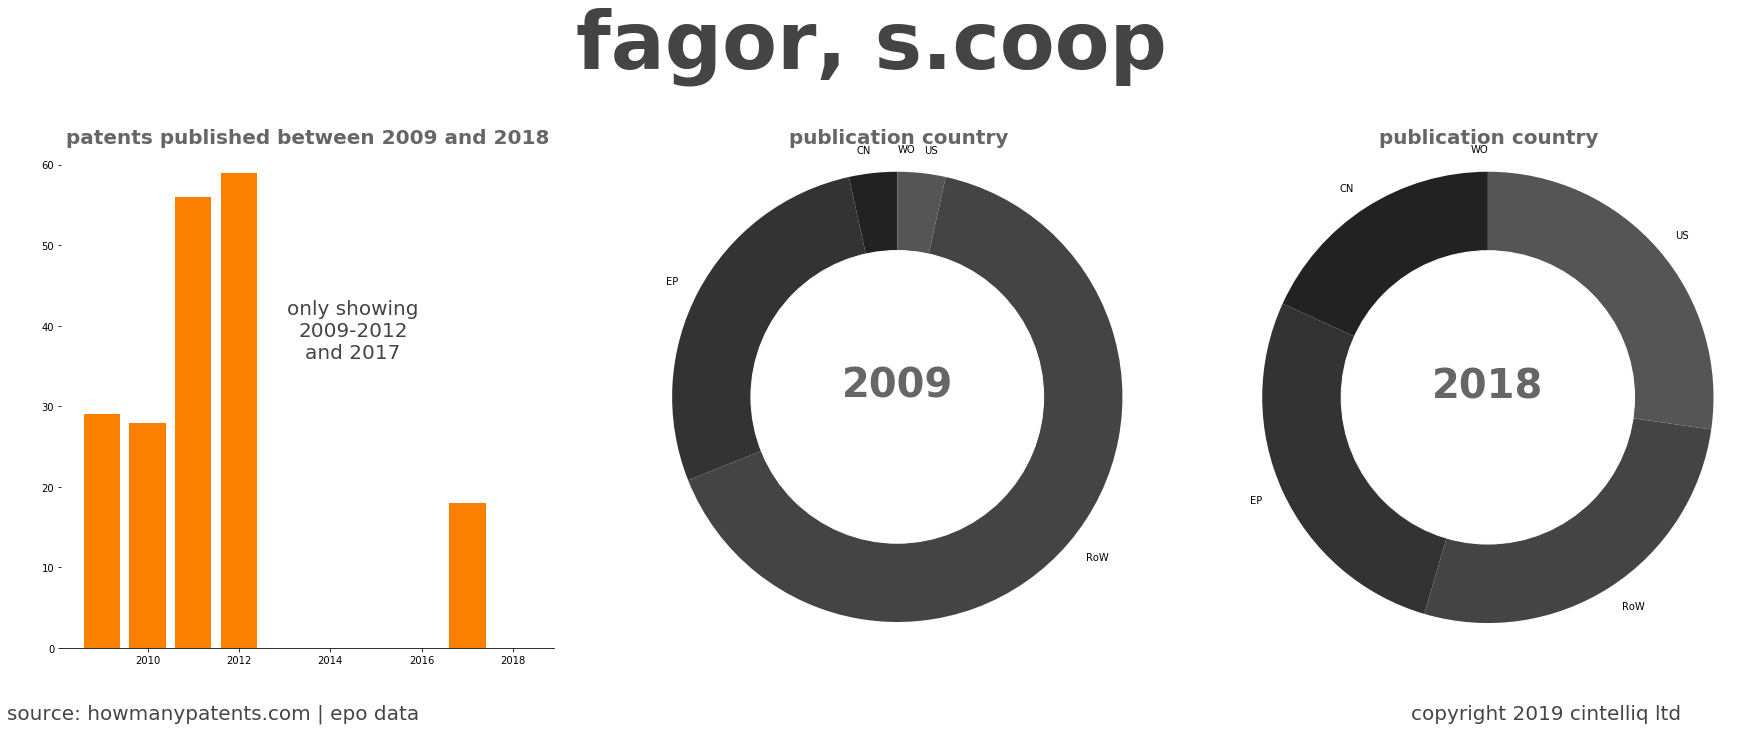 summary of patents for Fagor, S.Coop